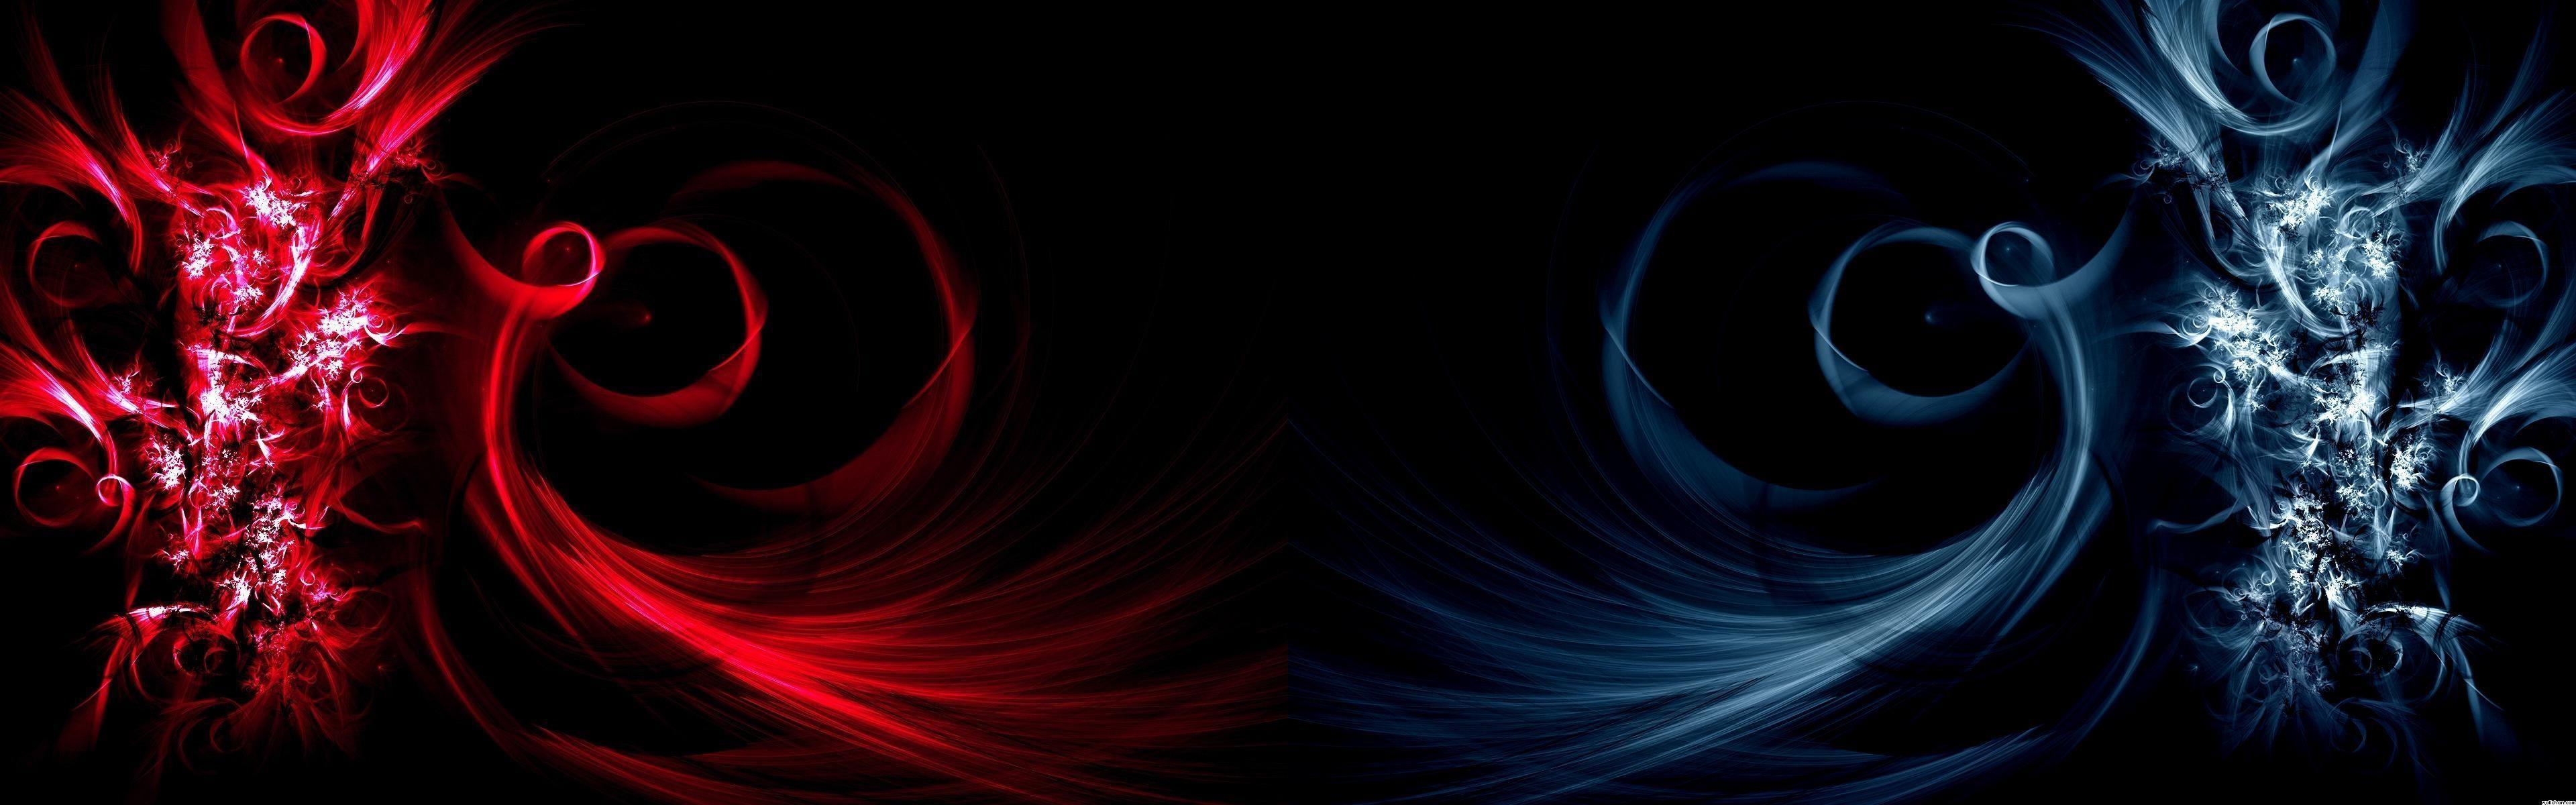 Blue and Red Dual Screen Wallpapers - Top Free Blue and Red Dual Screen